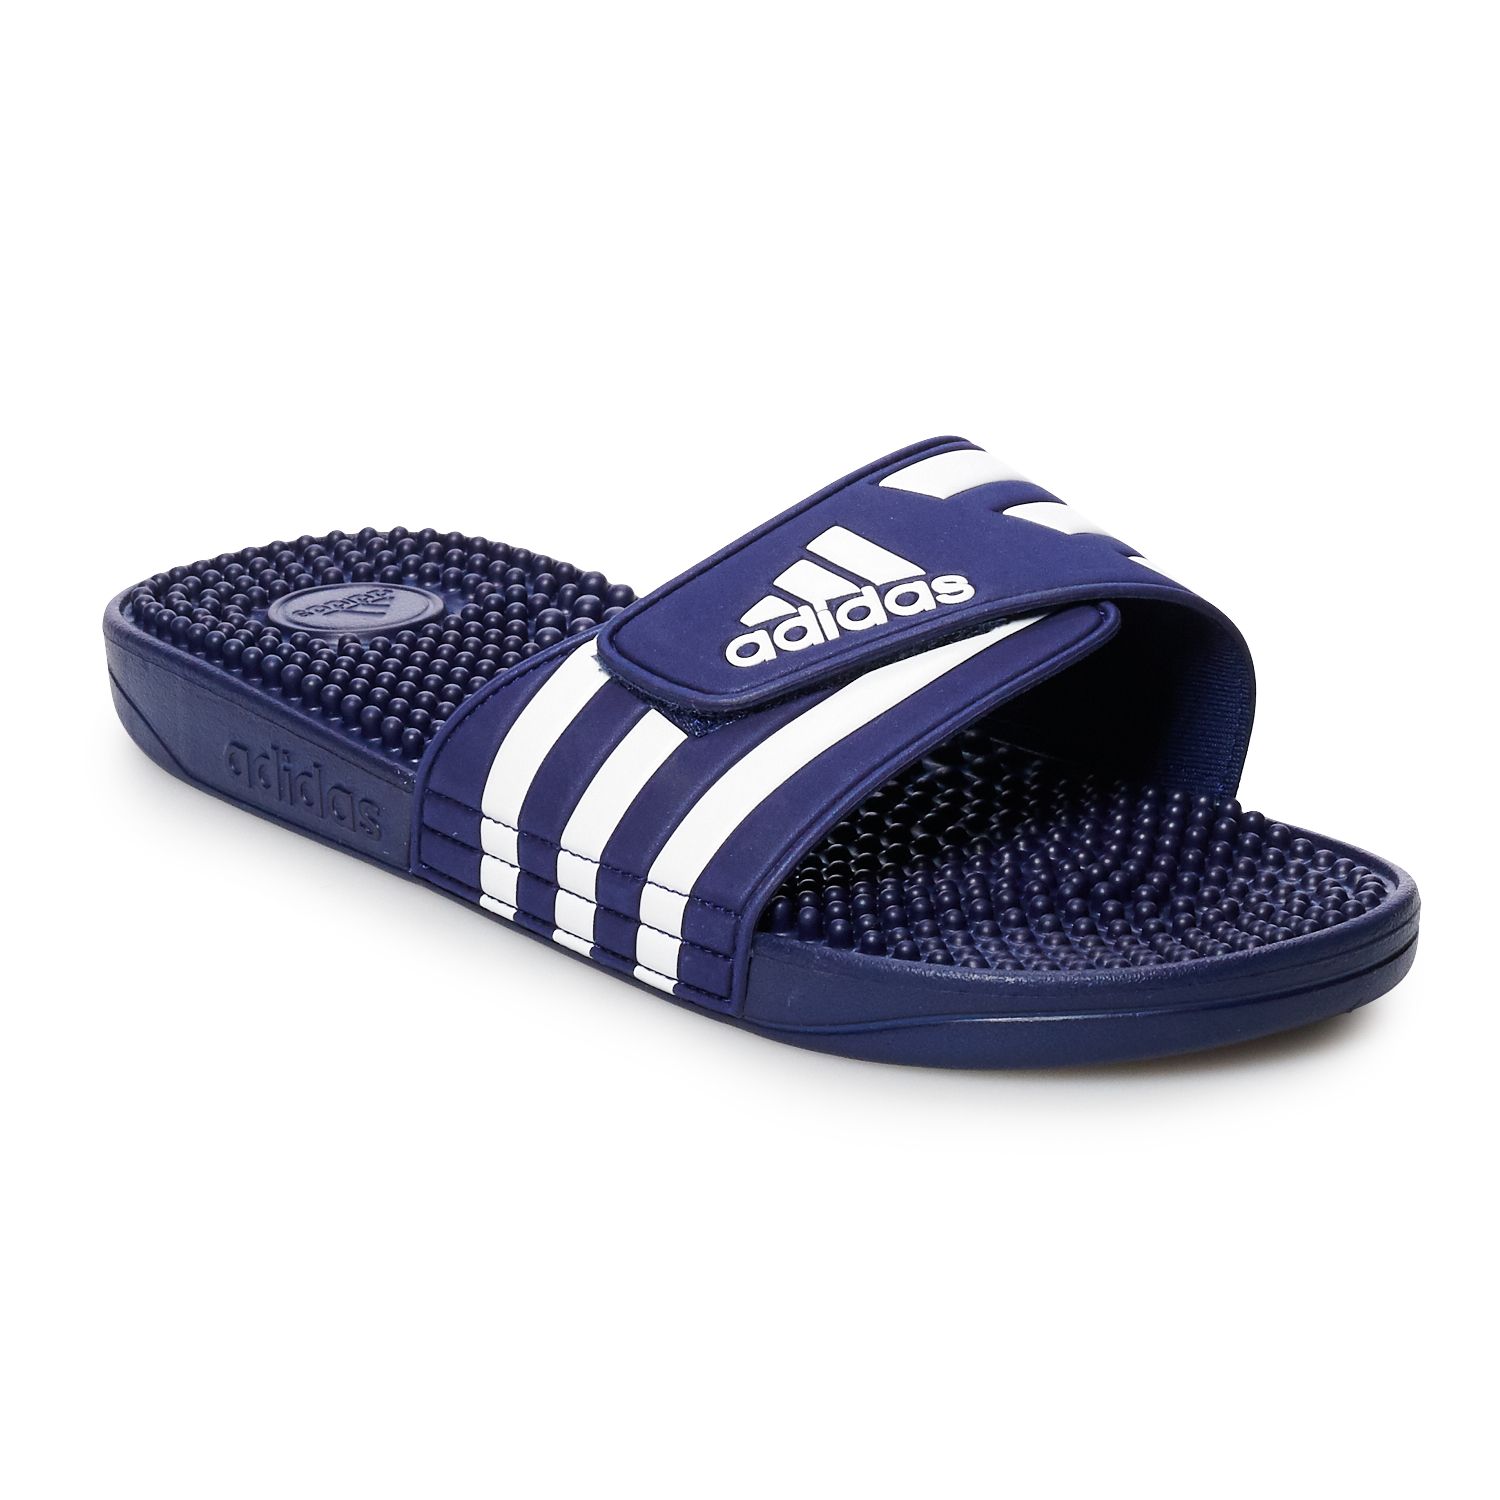 adidas flip flops blue and white